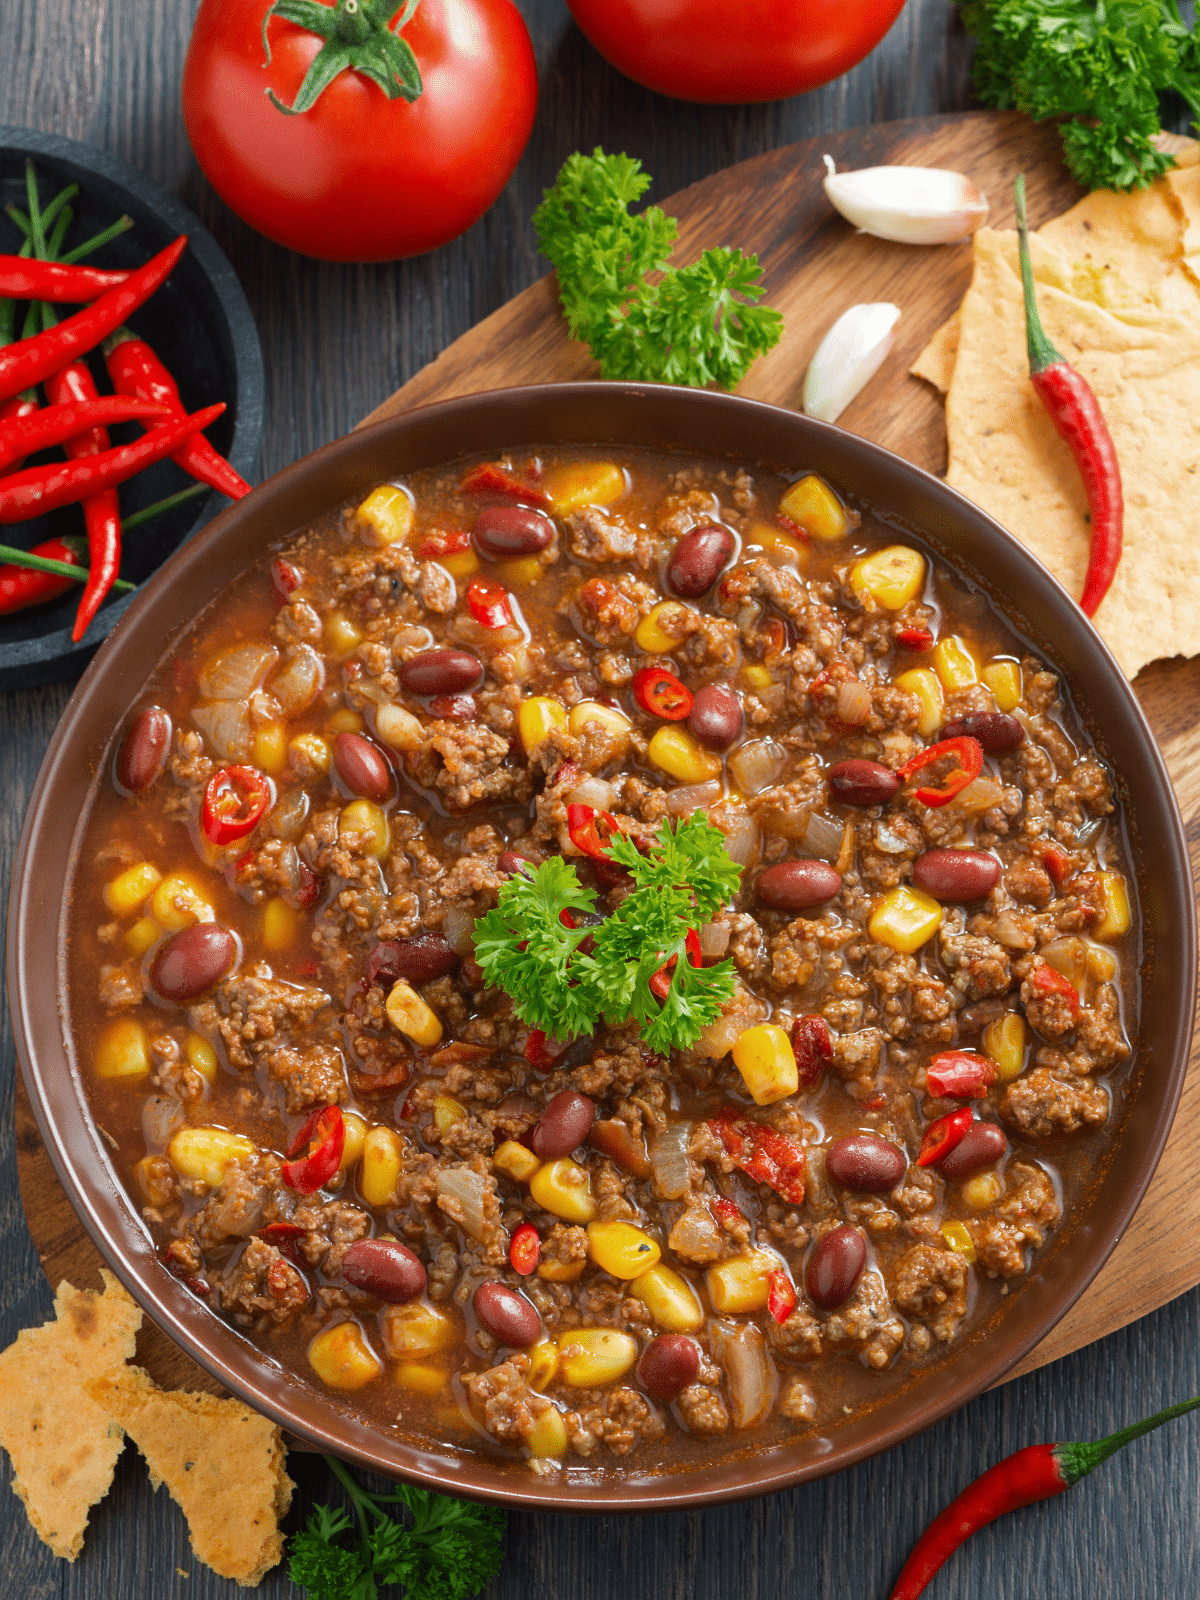 Bowl of Mexican dish chili con carne on a wooden board.